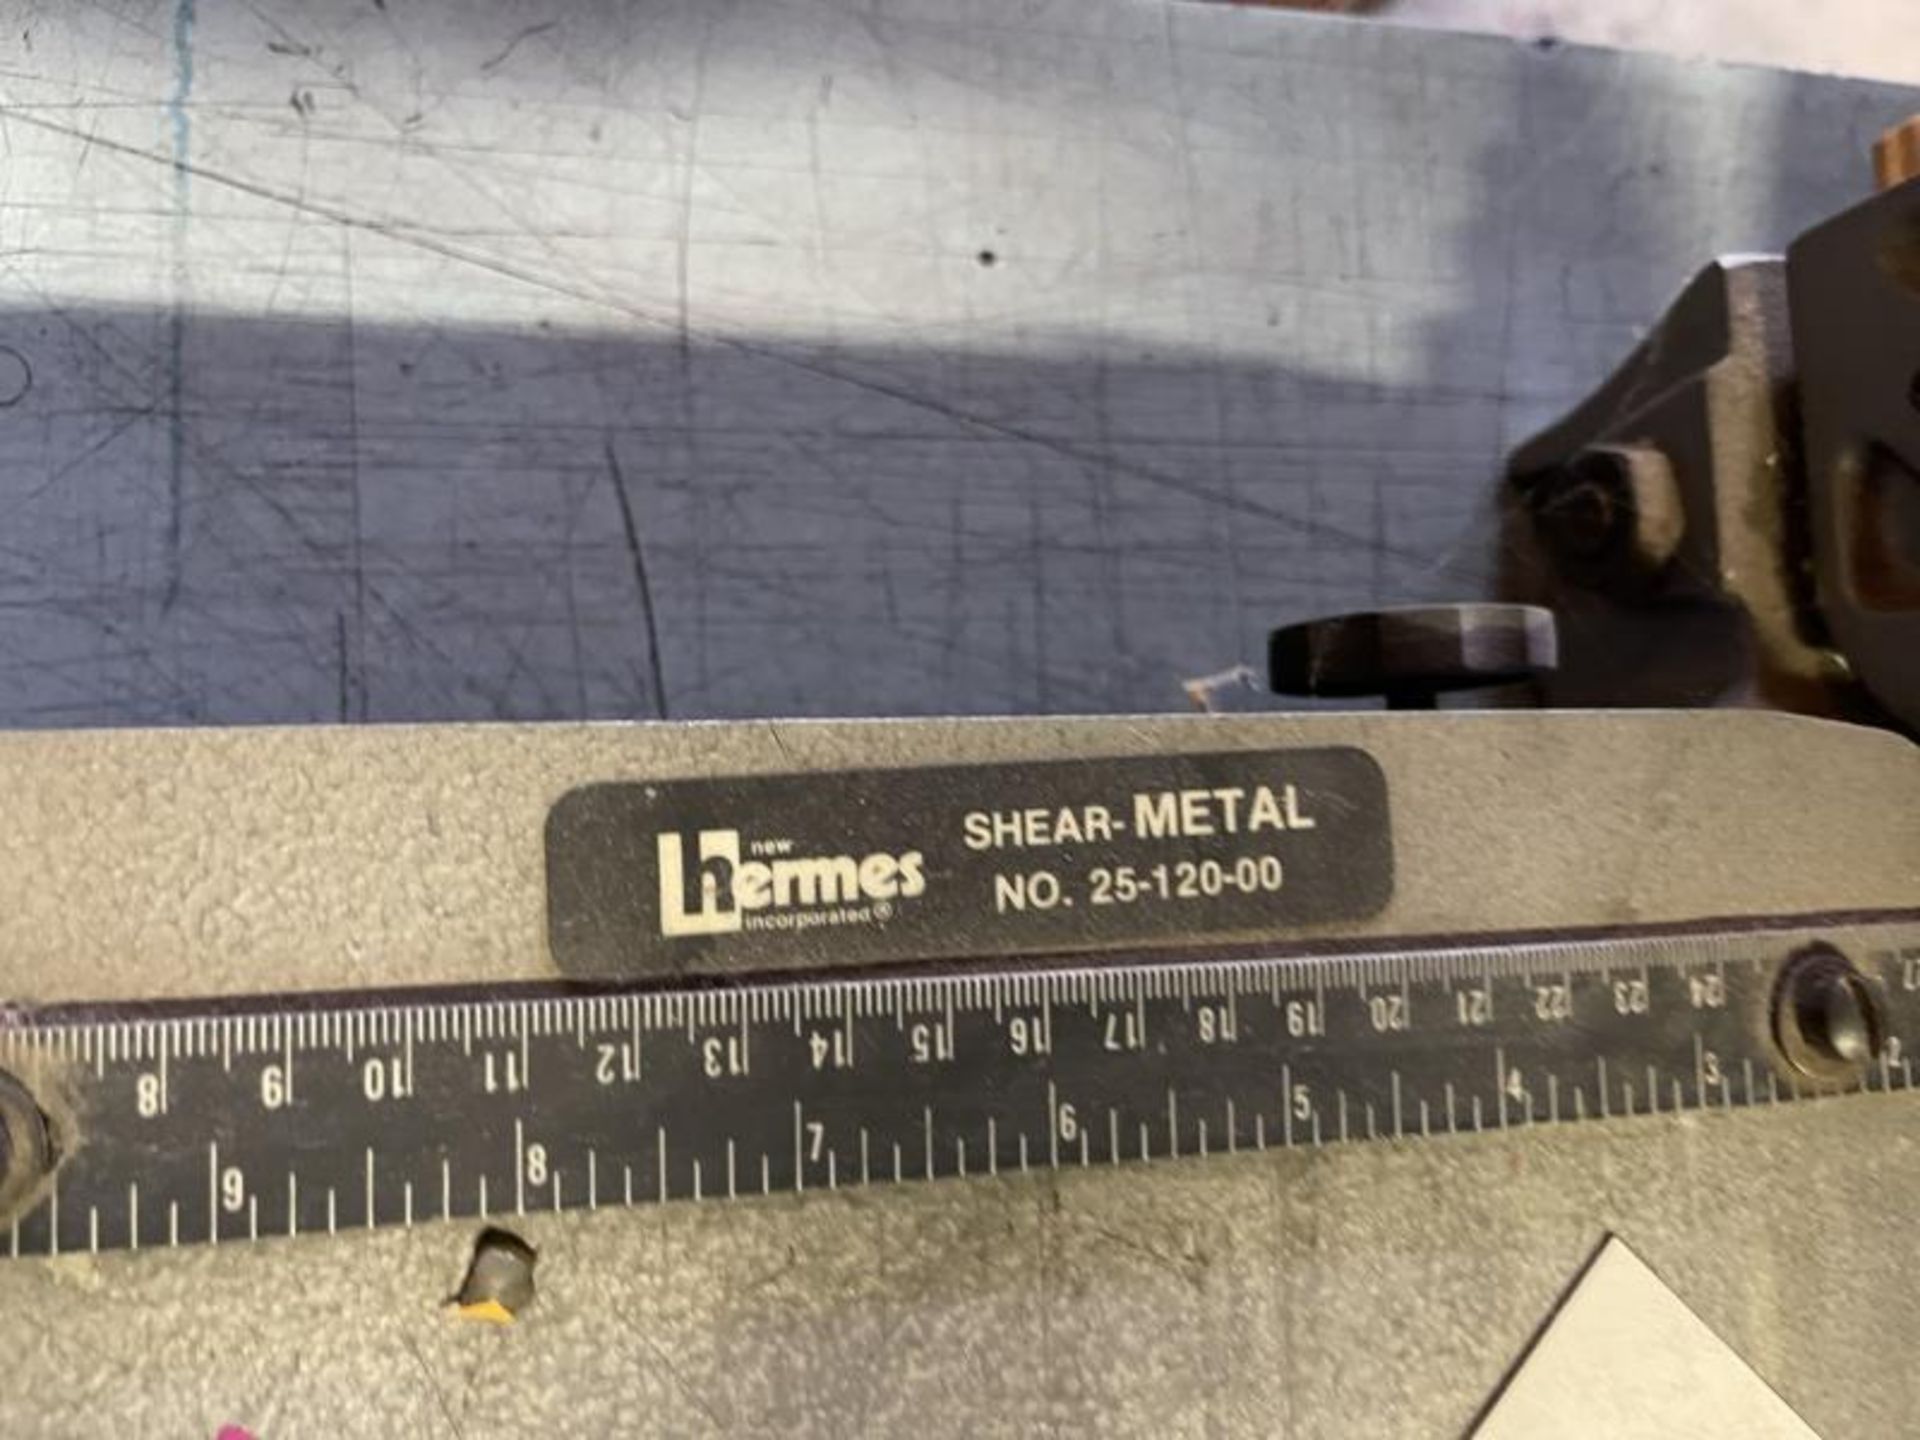 Table Top Metal Shear by Hermes, Model: 25-120-00 - Image 3 of 5